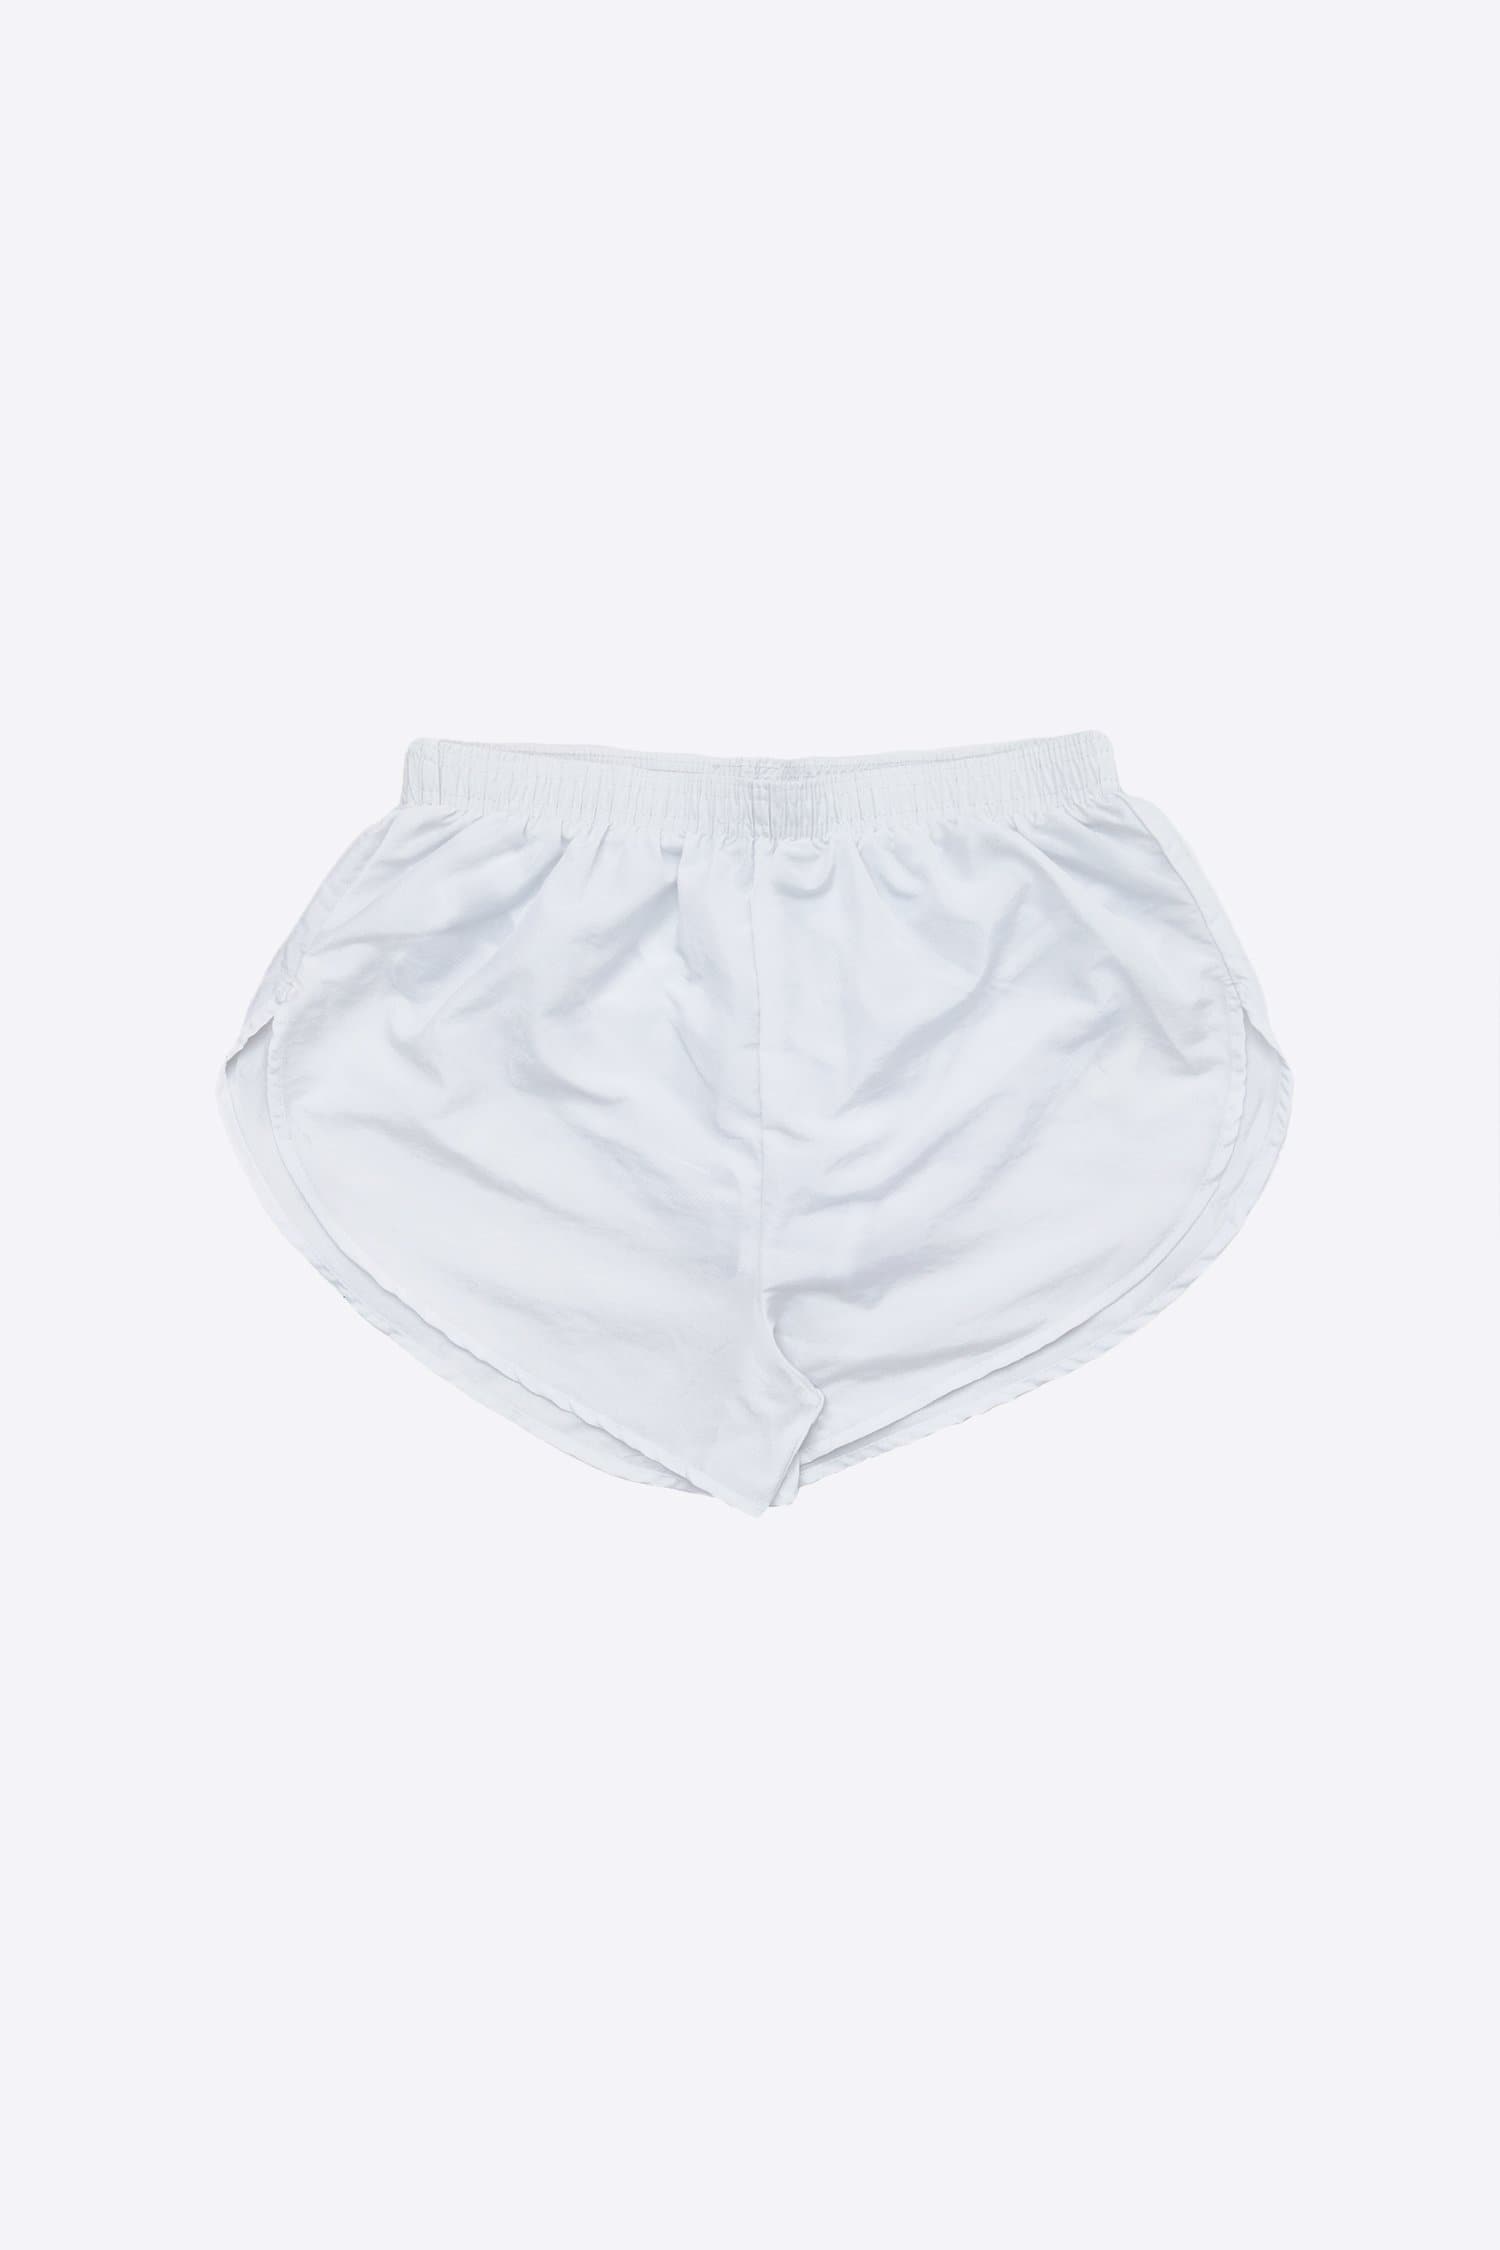 WHITE RETRO FIT NYLON SHORTS WITH A CONTRAST SIDE BAND